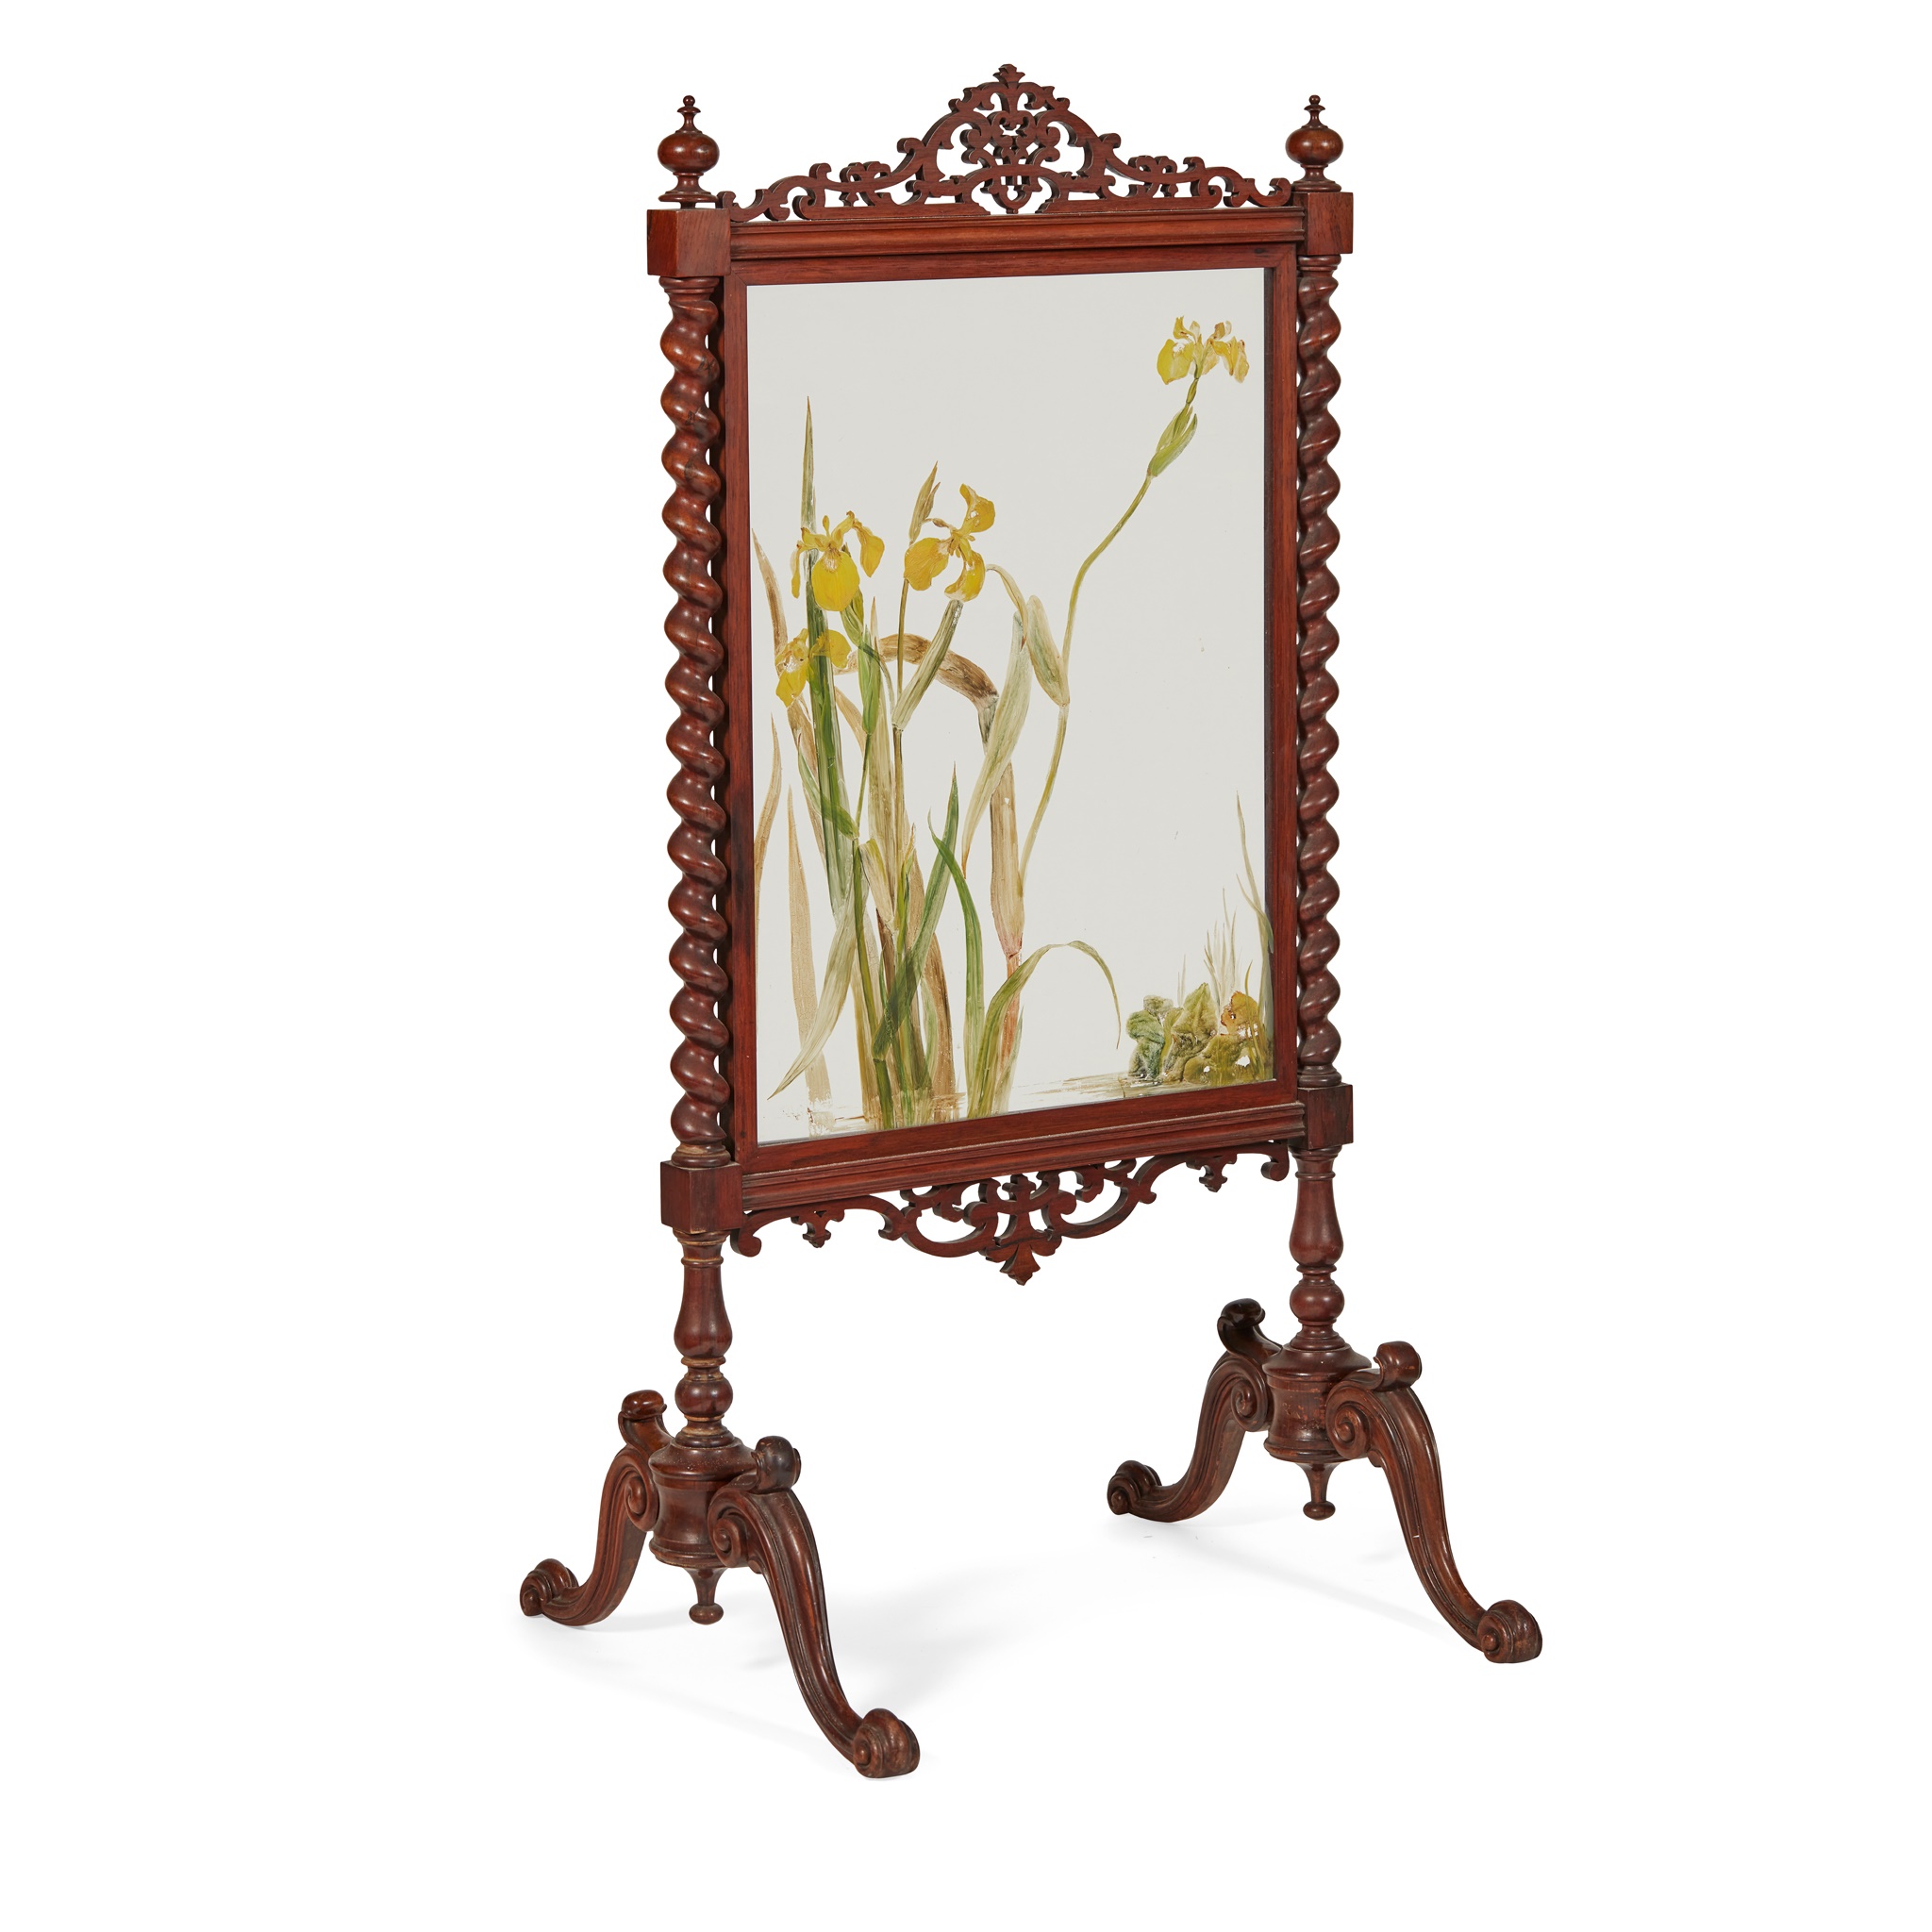 Y EARLY VICTORIAN ROSEWOOD AND PAINTED GLASS FIRESCREEN MID 19TH CENTURY